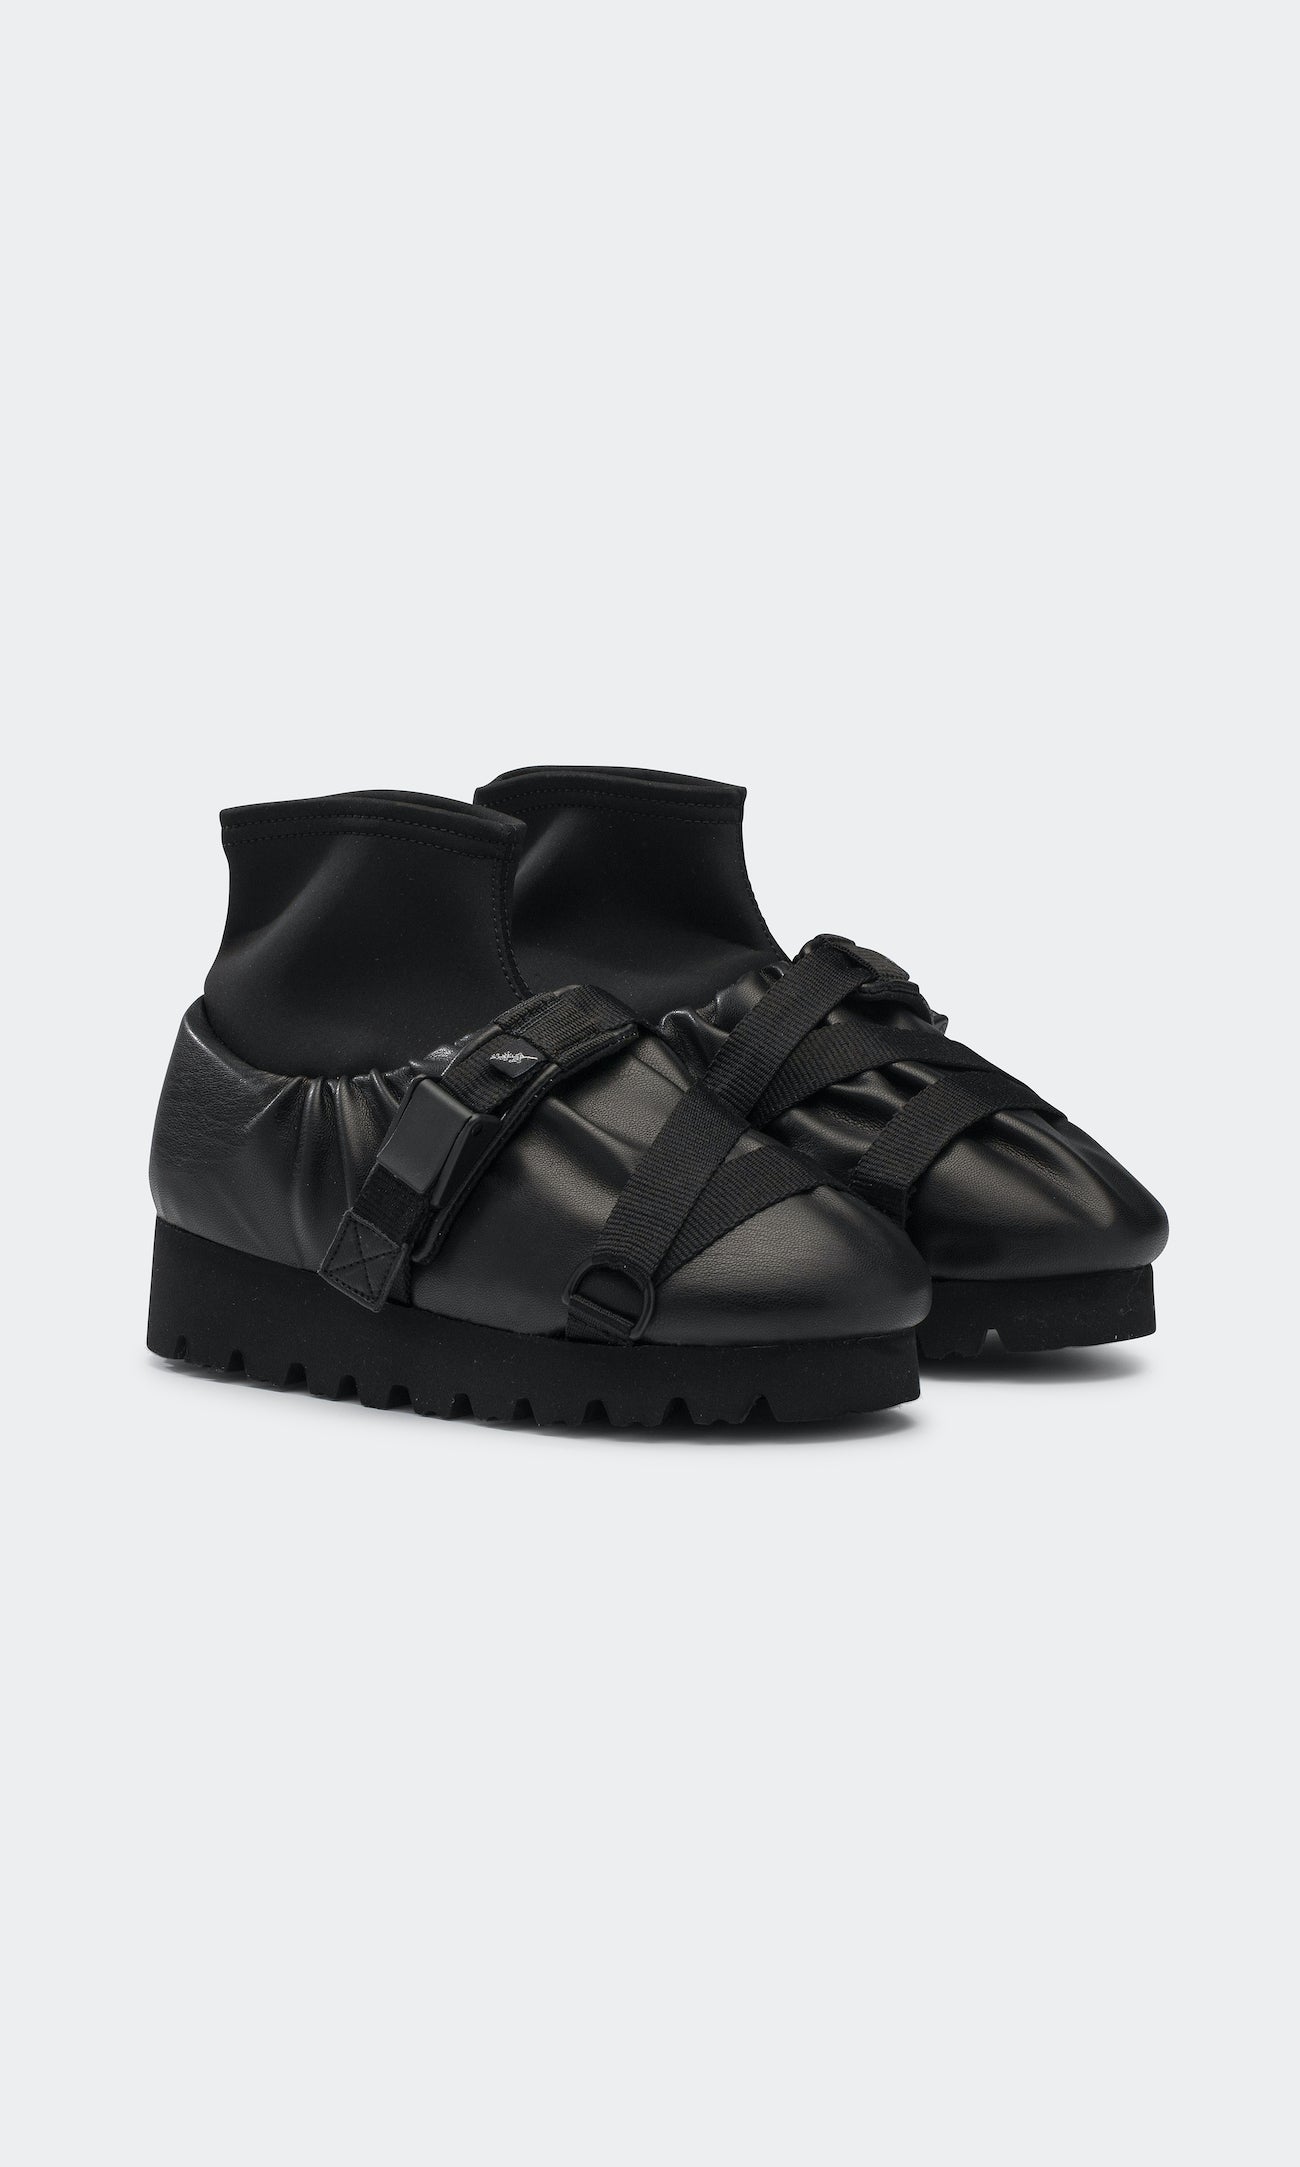 Camp shoe mid – YUME YUME | Official website